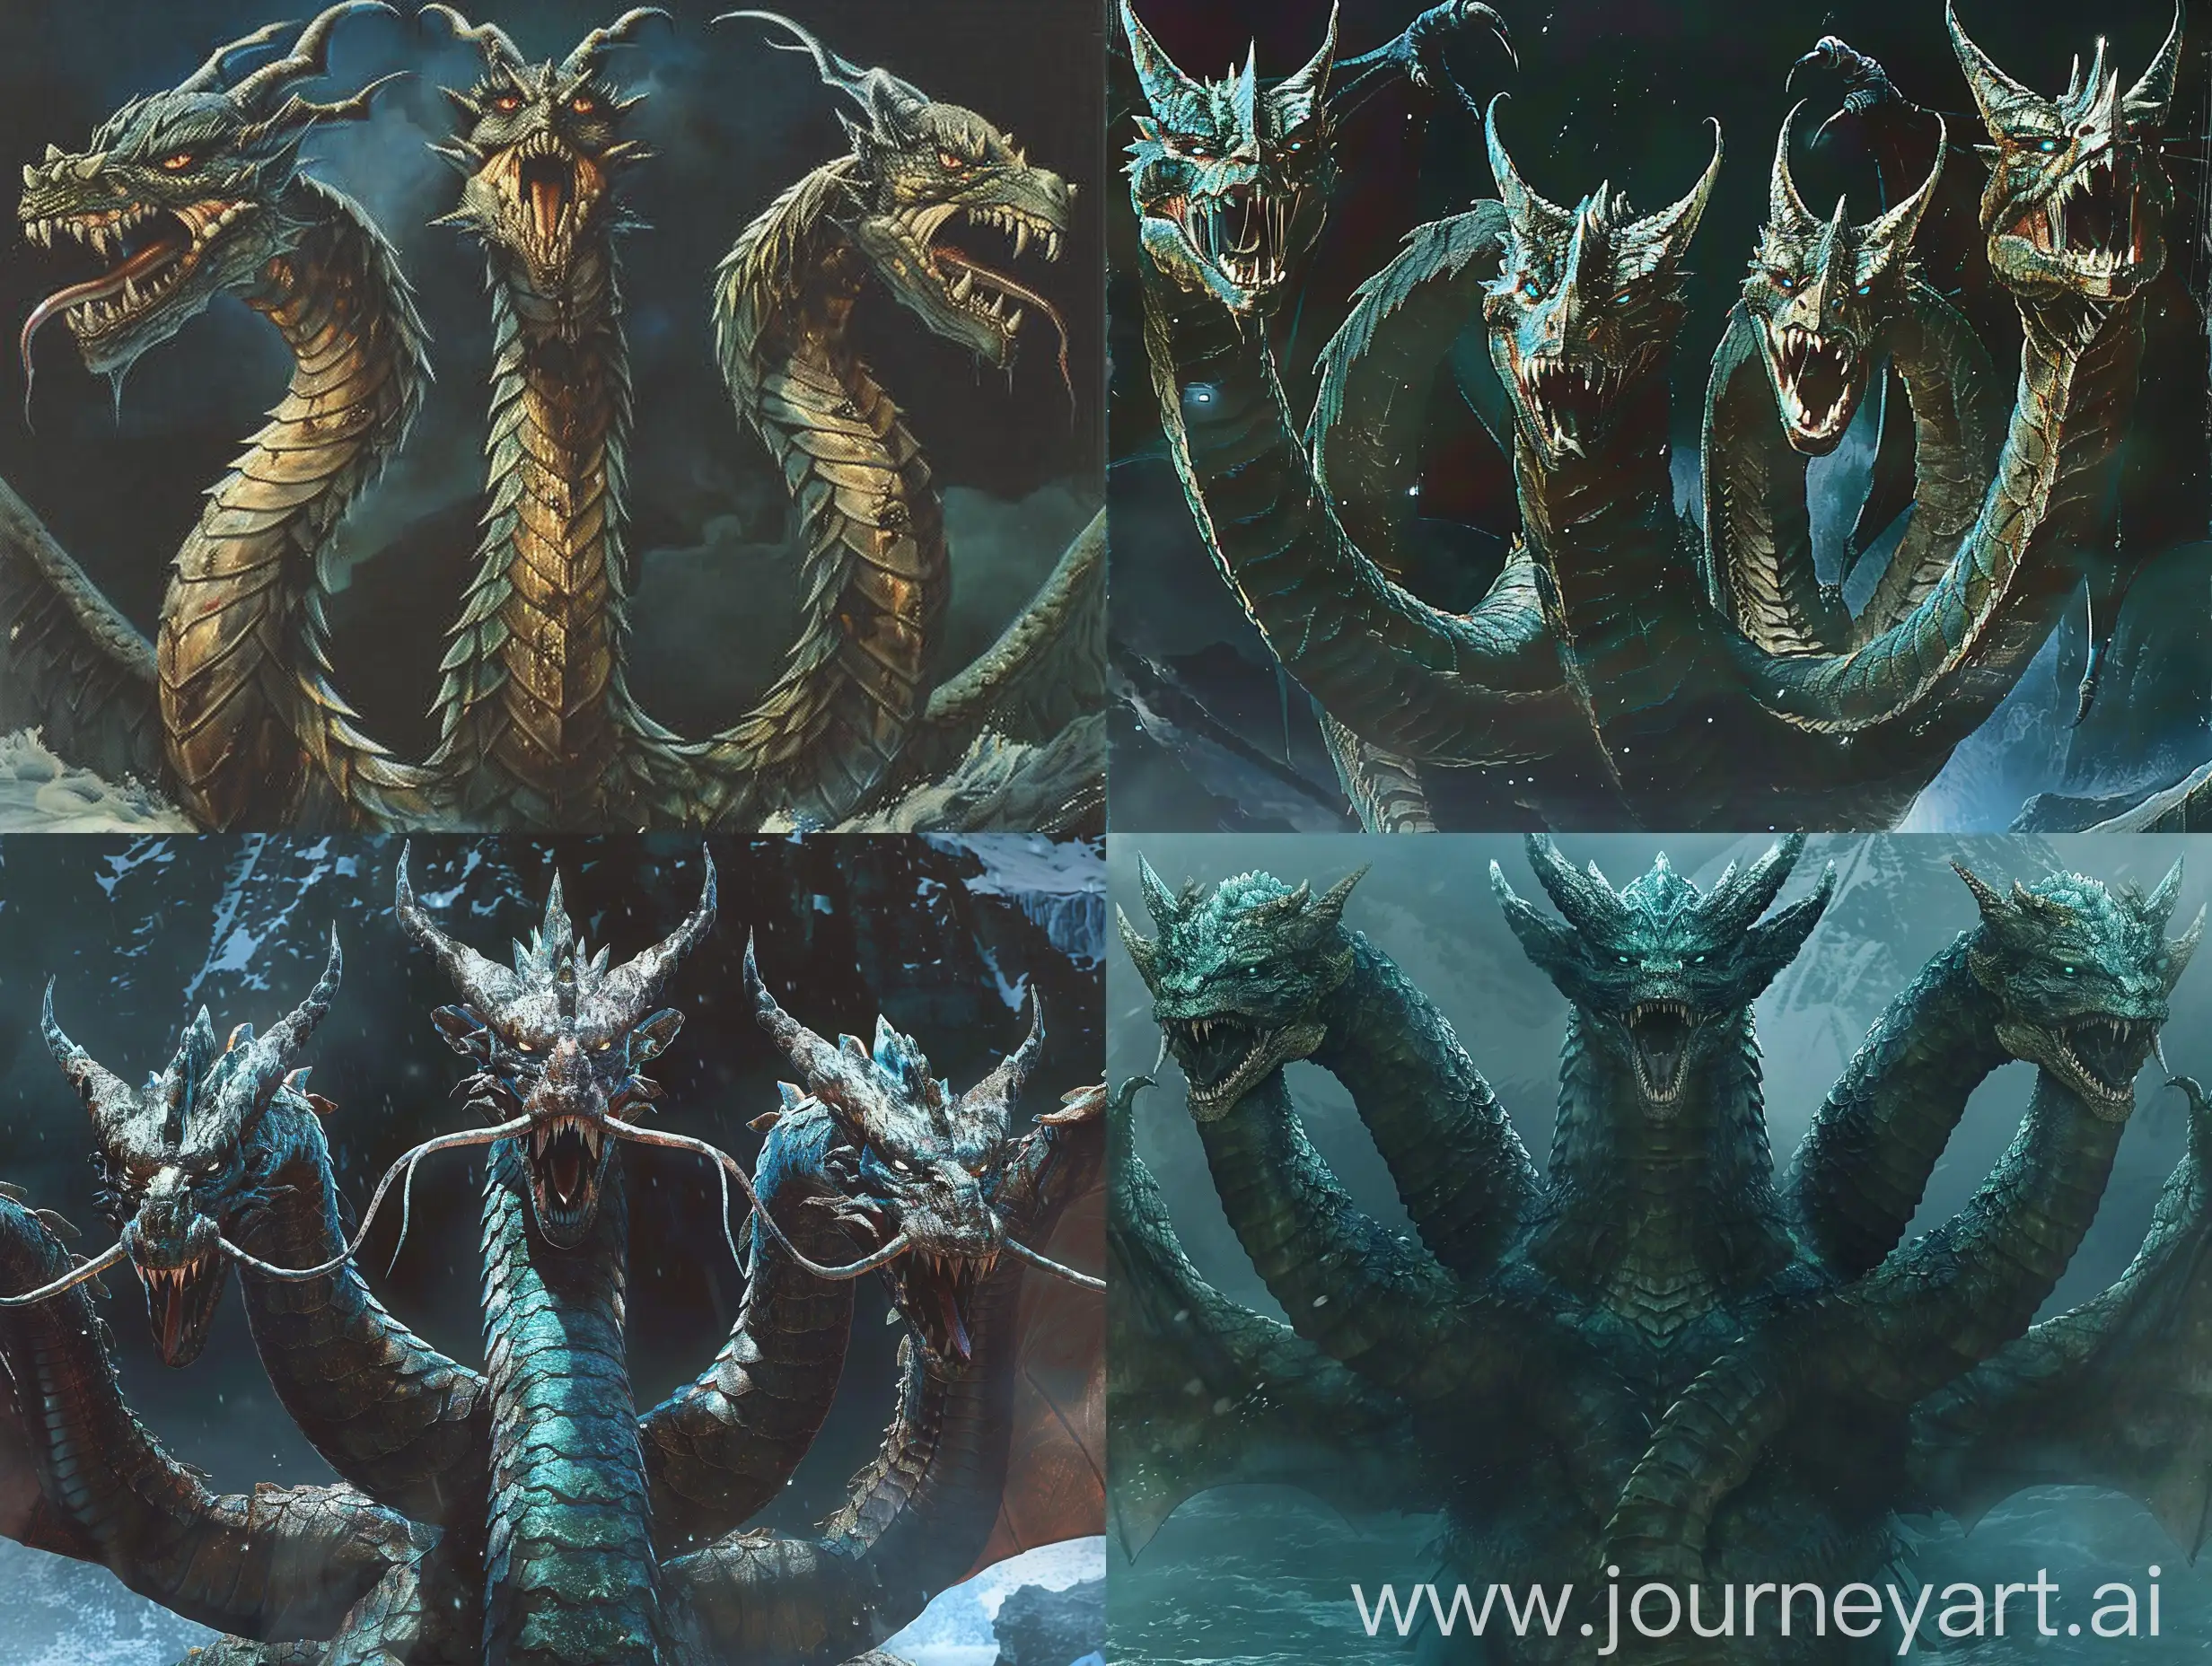 dvd screenshot of 1987 Dark Souls fantasy film Illustrated. Dark fantasy book illustration art. Lernaean Hydra, inspired by the King Ghidorah, featuring a colossal, dragon-like body with three distinct heads. Each head boasts sharp, menacing eyes, rows of gleaming, razor-sharp teeth, and a forked tongue. The body is muscular and covered with tough, shiny scales that range in color from dark emerald to a subtle midnight blue, giving the creature a camouflaging ability in dark waters or night skies. Attach robust, leathery wings, similar in texture to those of bats but with the massive span and strength of a dragon’s wings, enabling powerful gusts of wind as they beat. The tail is long and flexible, ending in spiky, barbed tips that can be used as lethal weapons. Each neck is long and serpentine, allowing the heads independent movement to strike from multiple angles, heightening its fearsome presence in any mythical scenario you envision.Simply giant under the great snow mountain. Dark fantasy book illustration art.